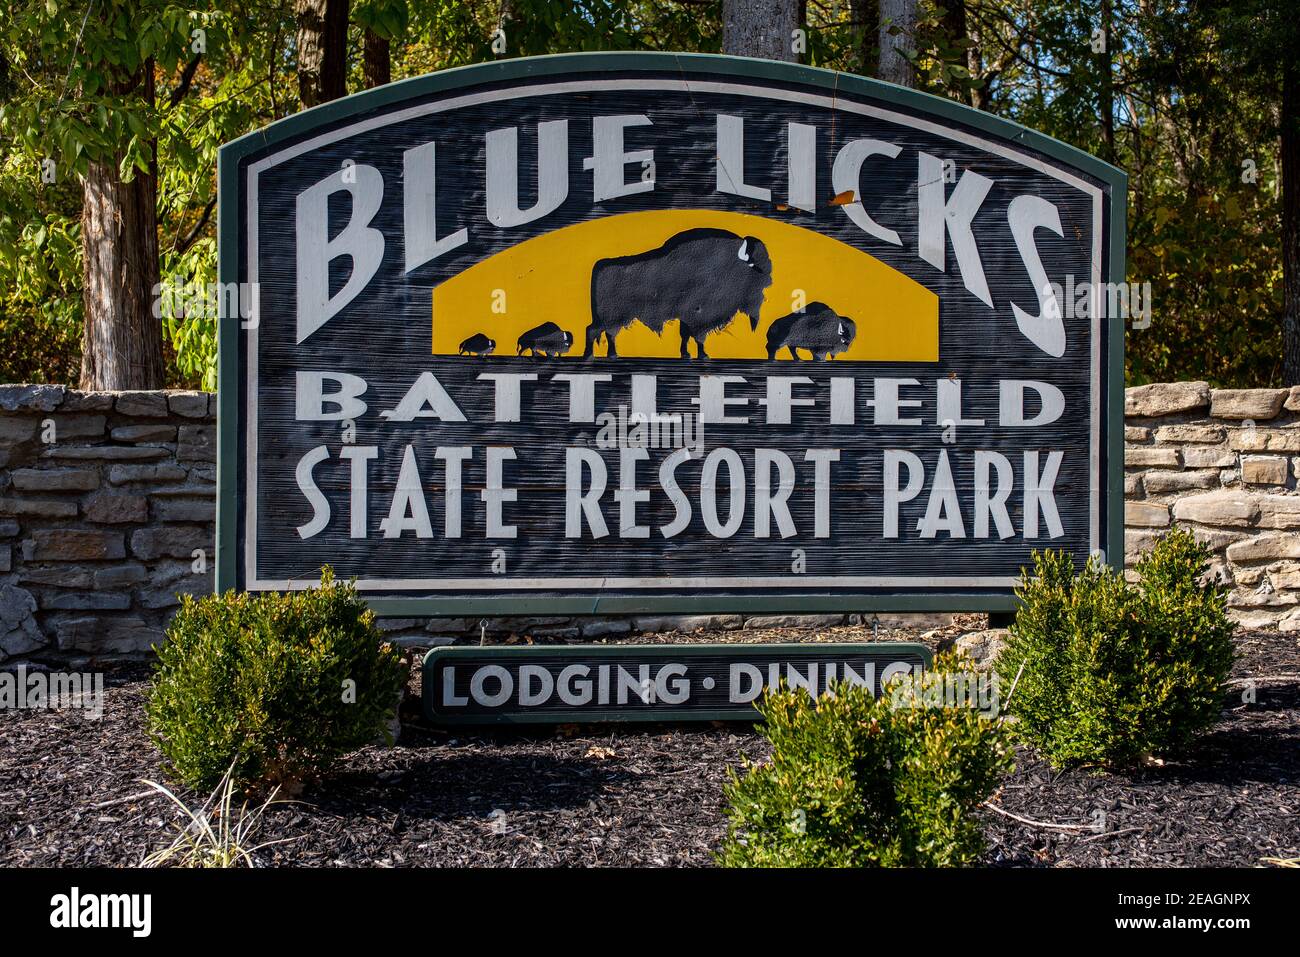 Entrance sign for Blue Licks Battlefield State Resort Park in Kentucky Stock Photo